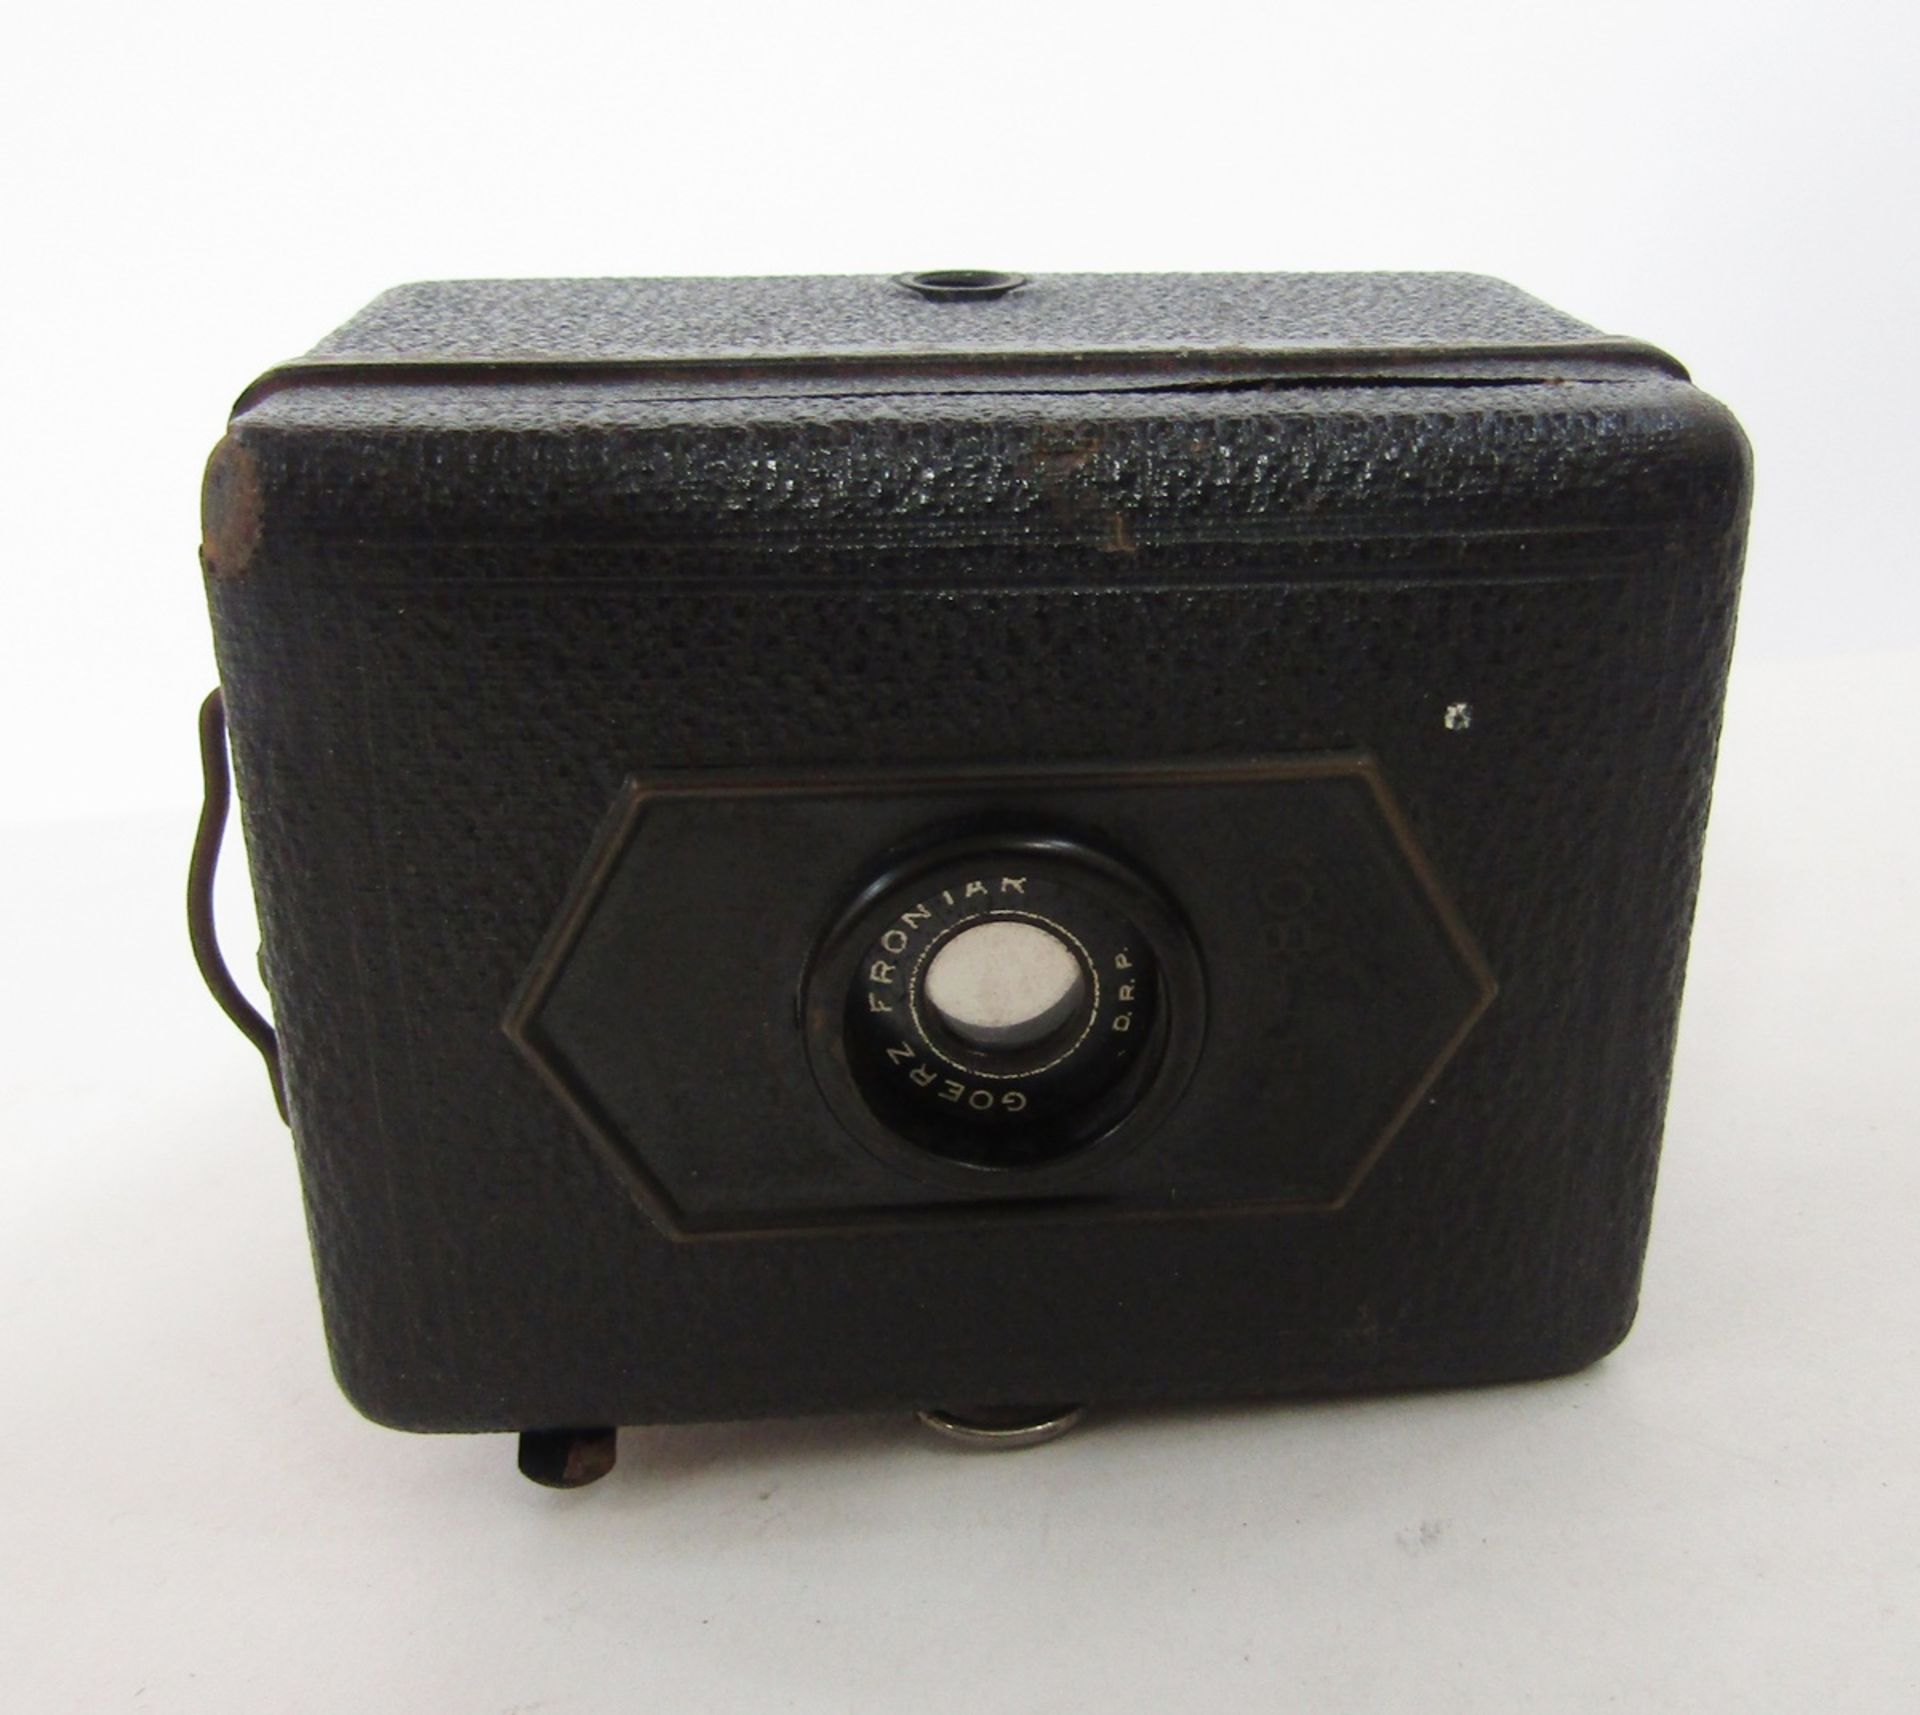 Sida Standard miniature camera, in original leather case, together with a Zeiss baby box Tengor - Image 4 of 4